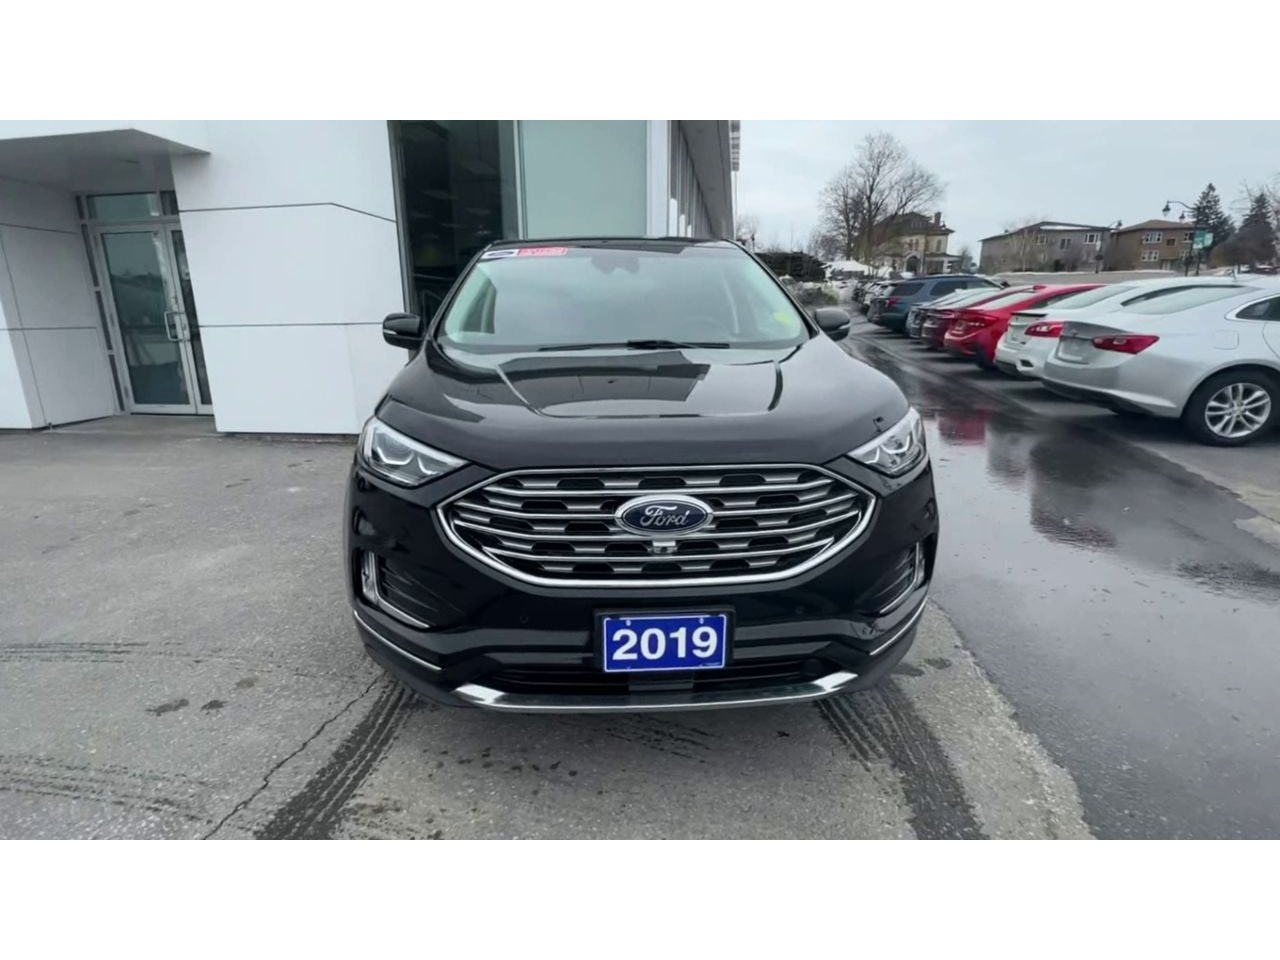 2019 Ford Edge - 20756A Full Image 3